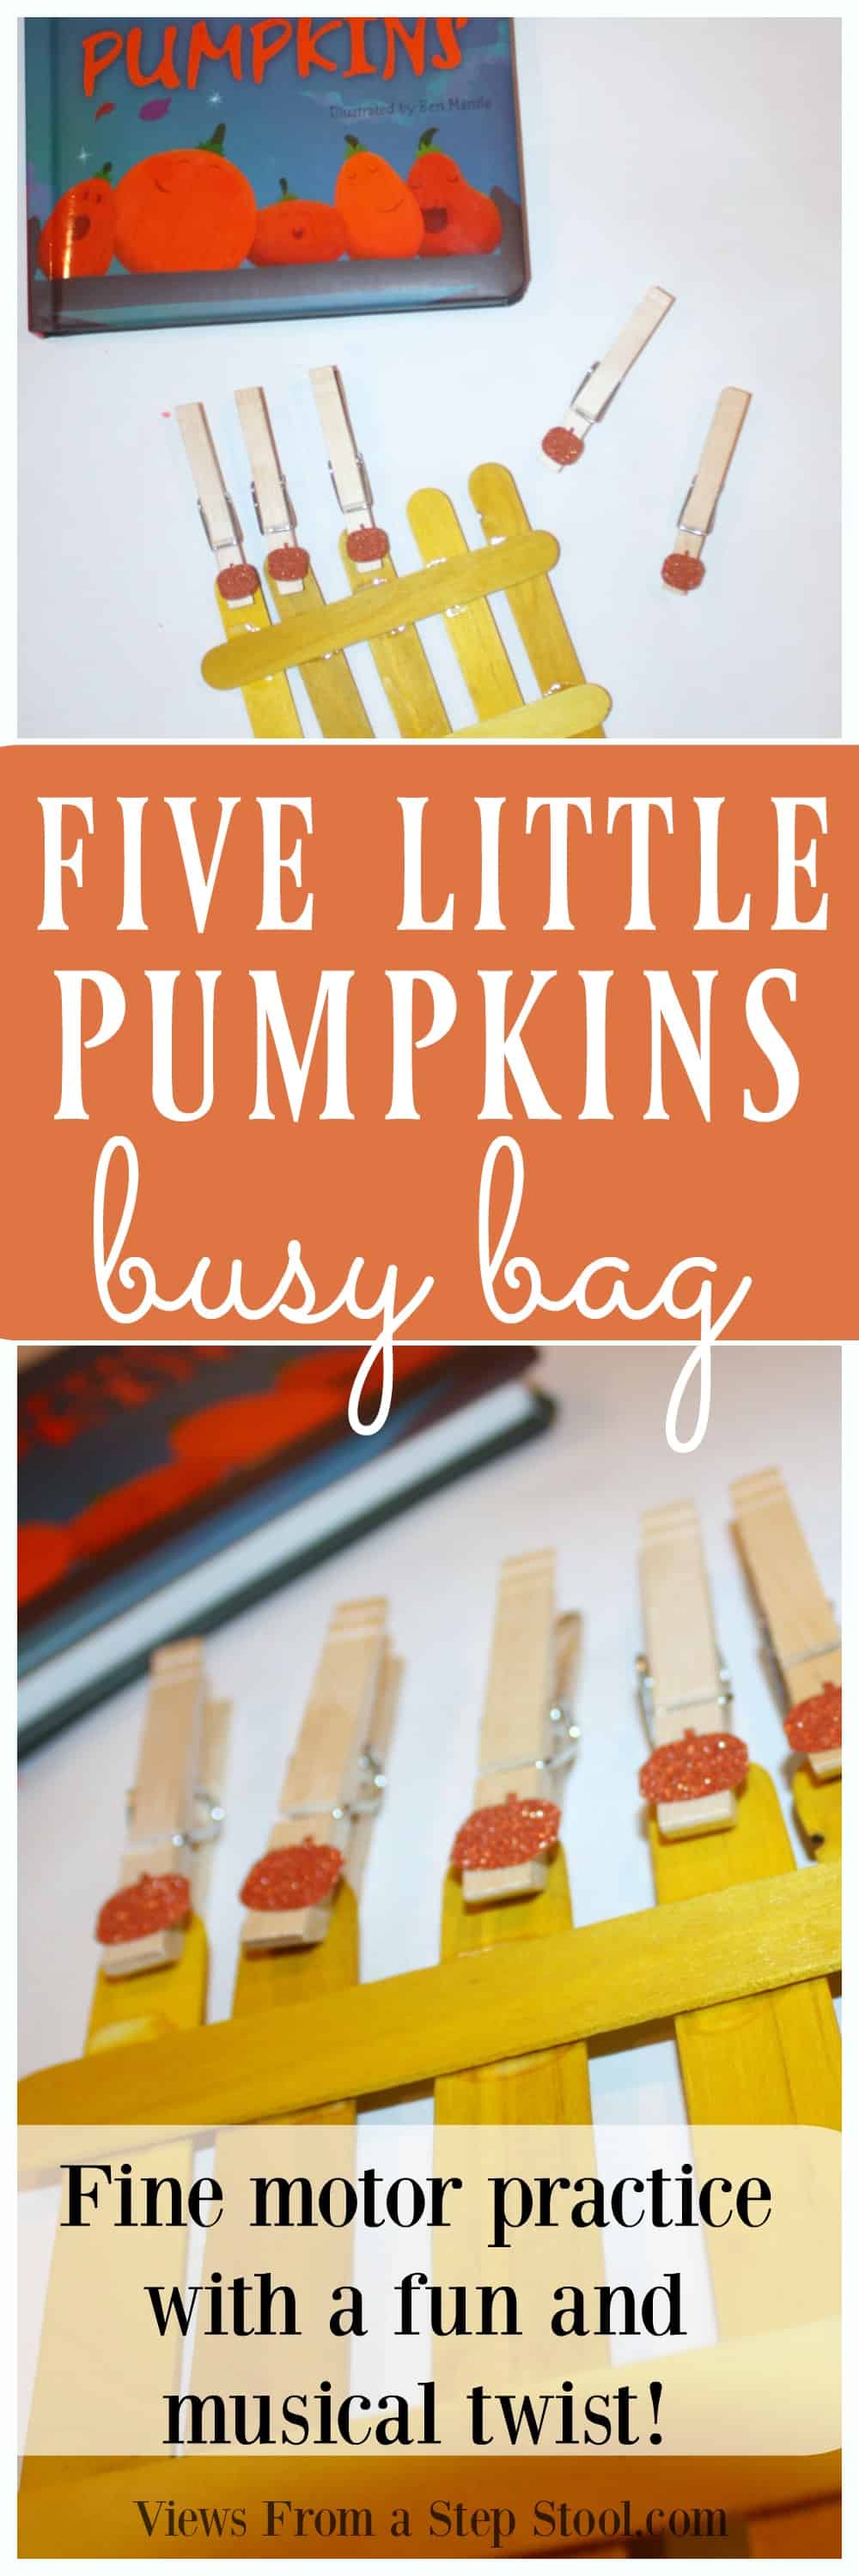 This 5 Little Pumpkins fine motor busy bag is simple to throw together and will keep your kids practicing pre-handwriting skills without even knowing it! 